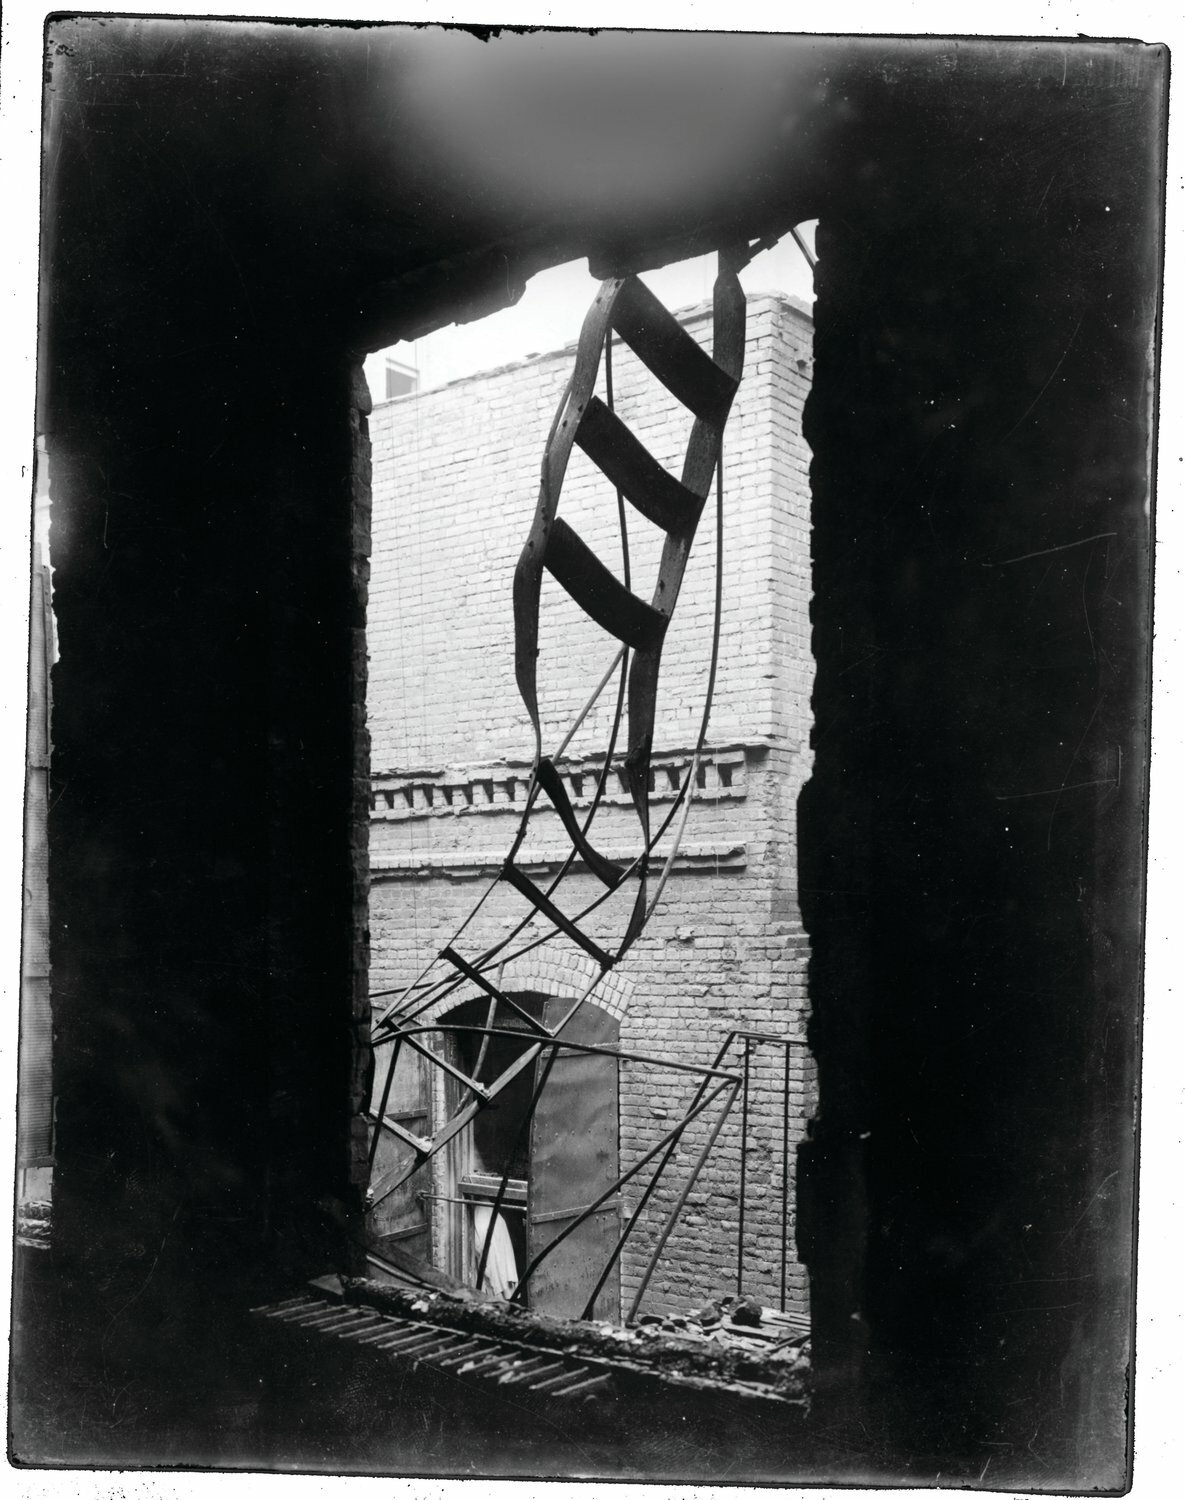 The twisted remnants of a fire escape alongside the Triangle Shirtwaist Factory on Washington Place following the March 25, 1911 fire that killed 146 garment workers.